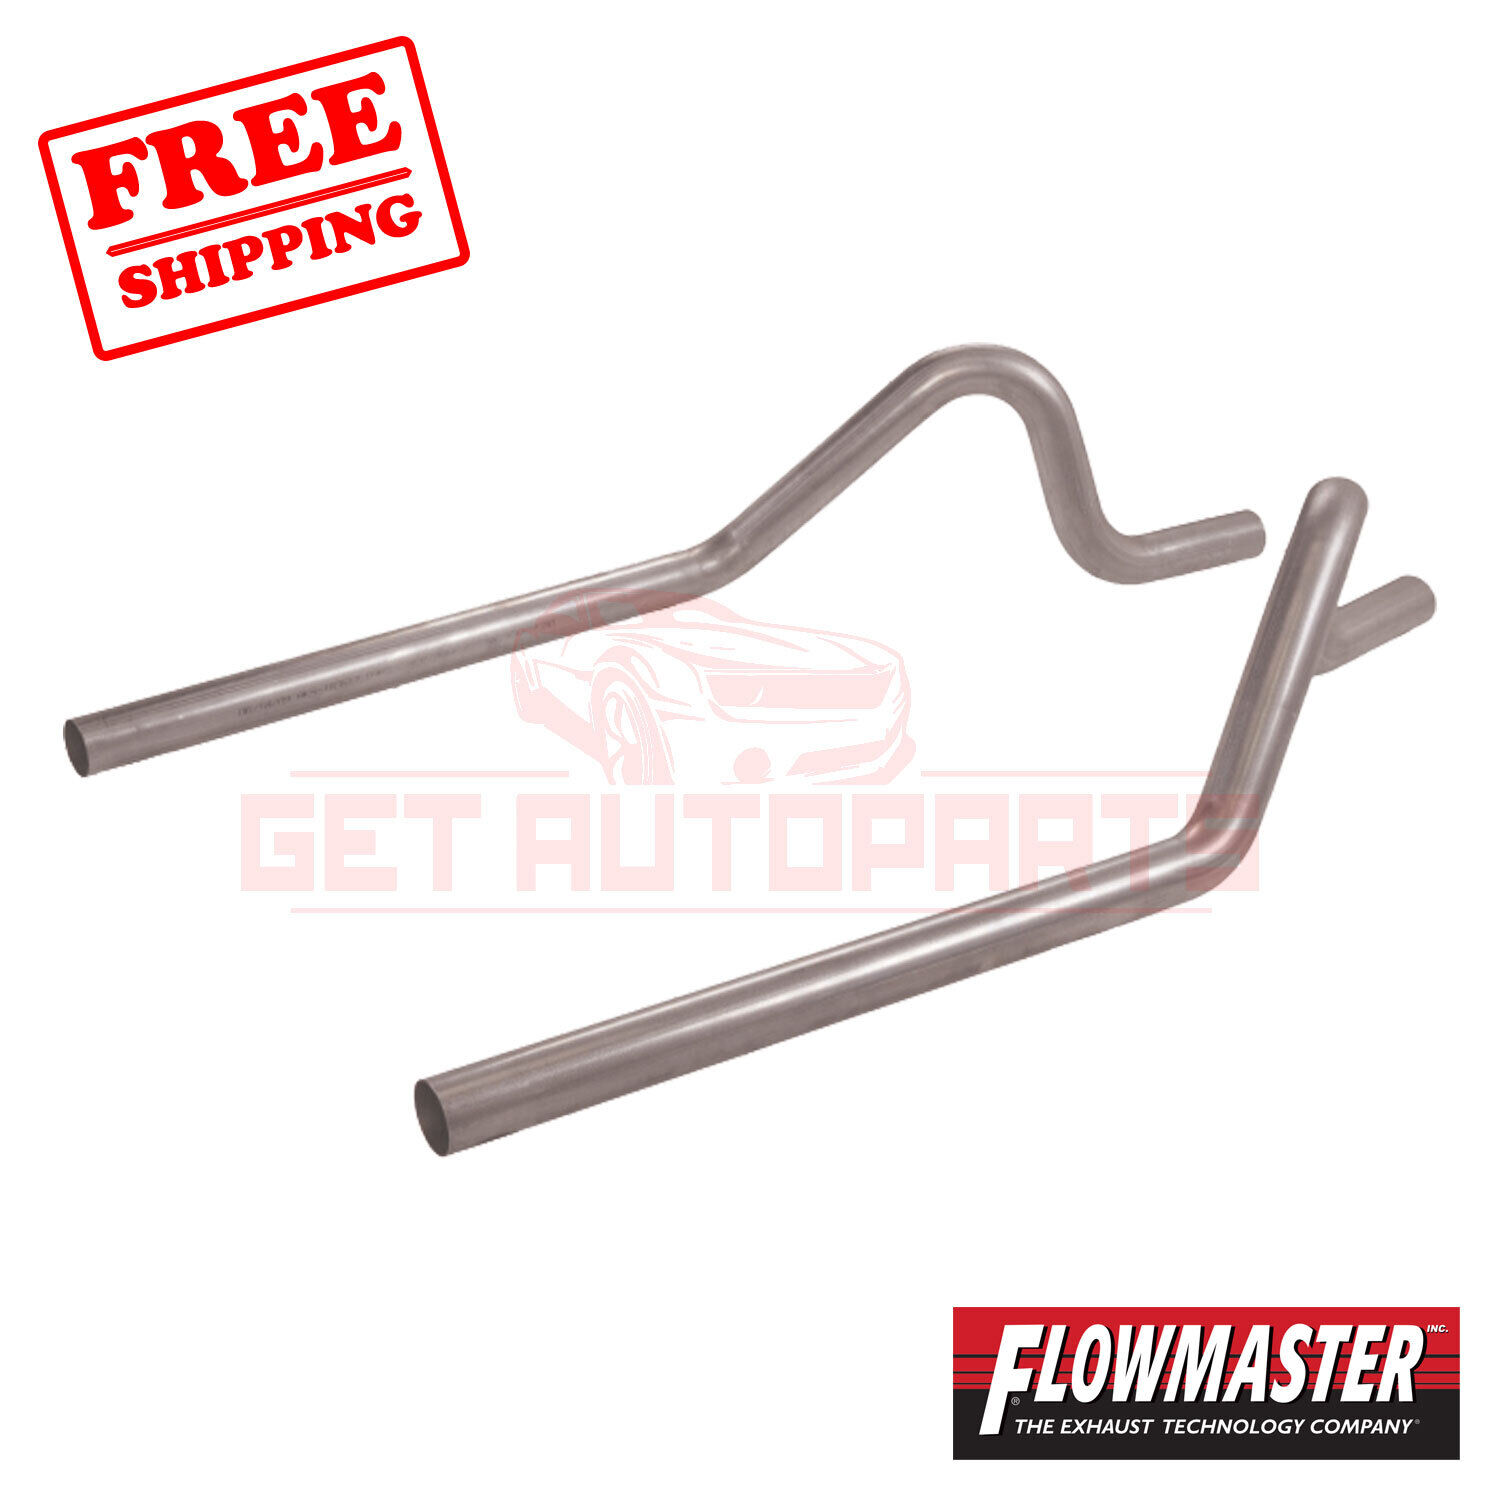 FlowMaster Exhaust Tail Pipe for 1967-1973 Mercury Cougar